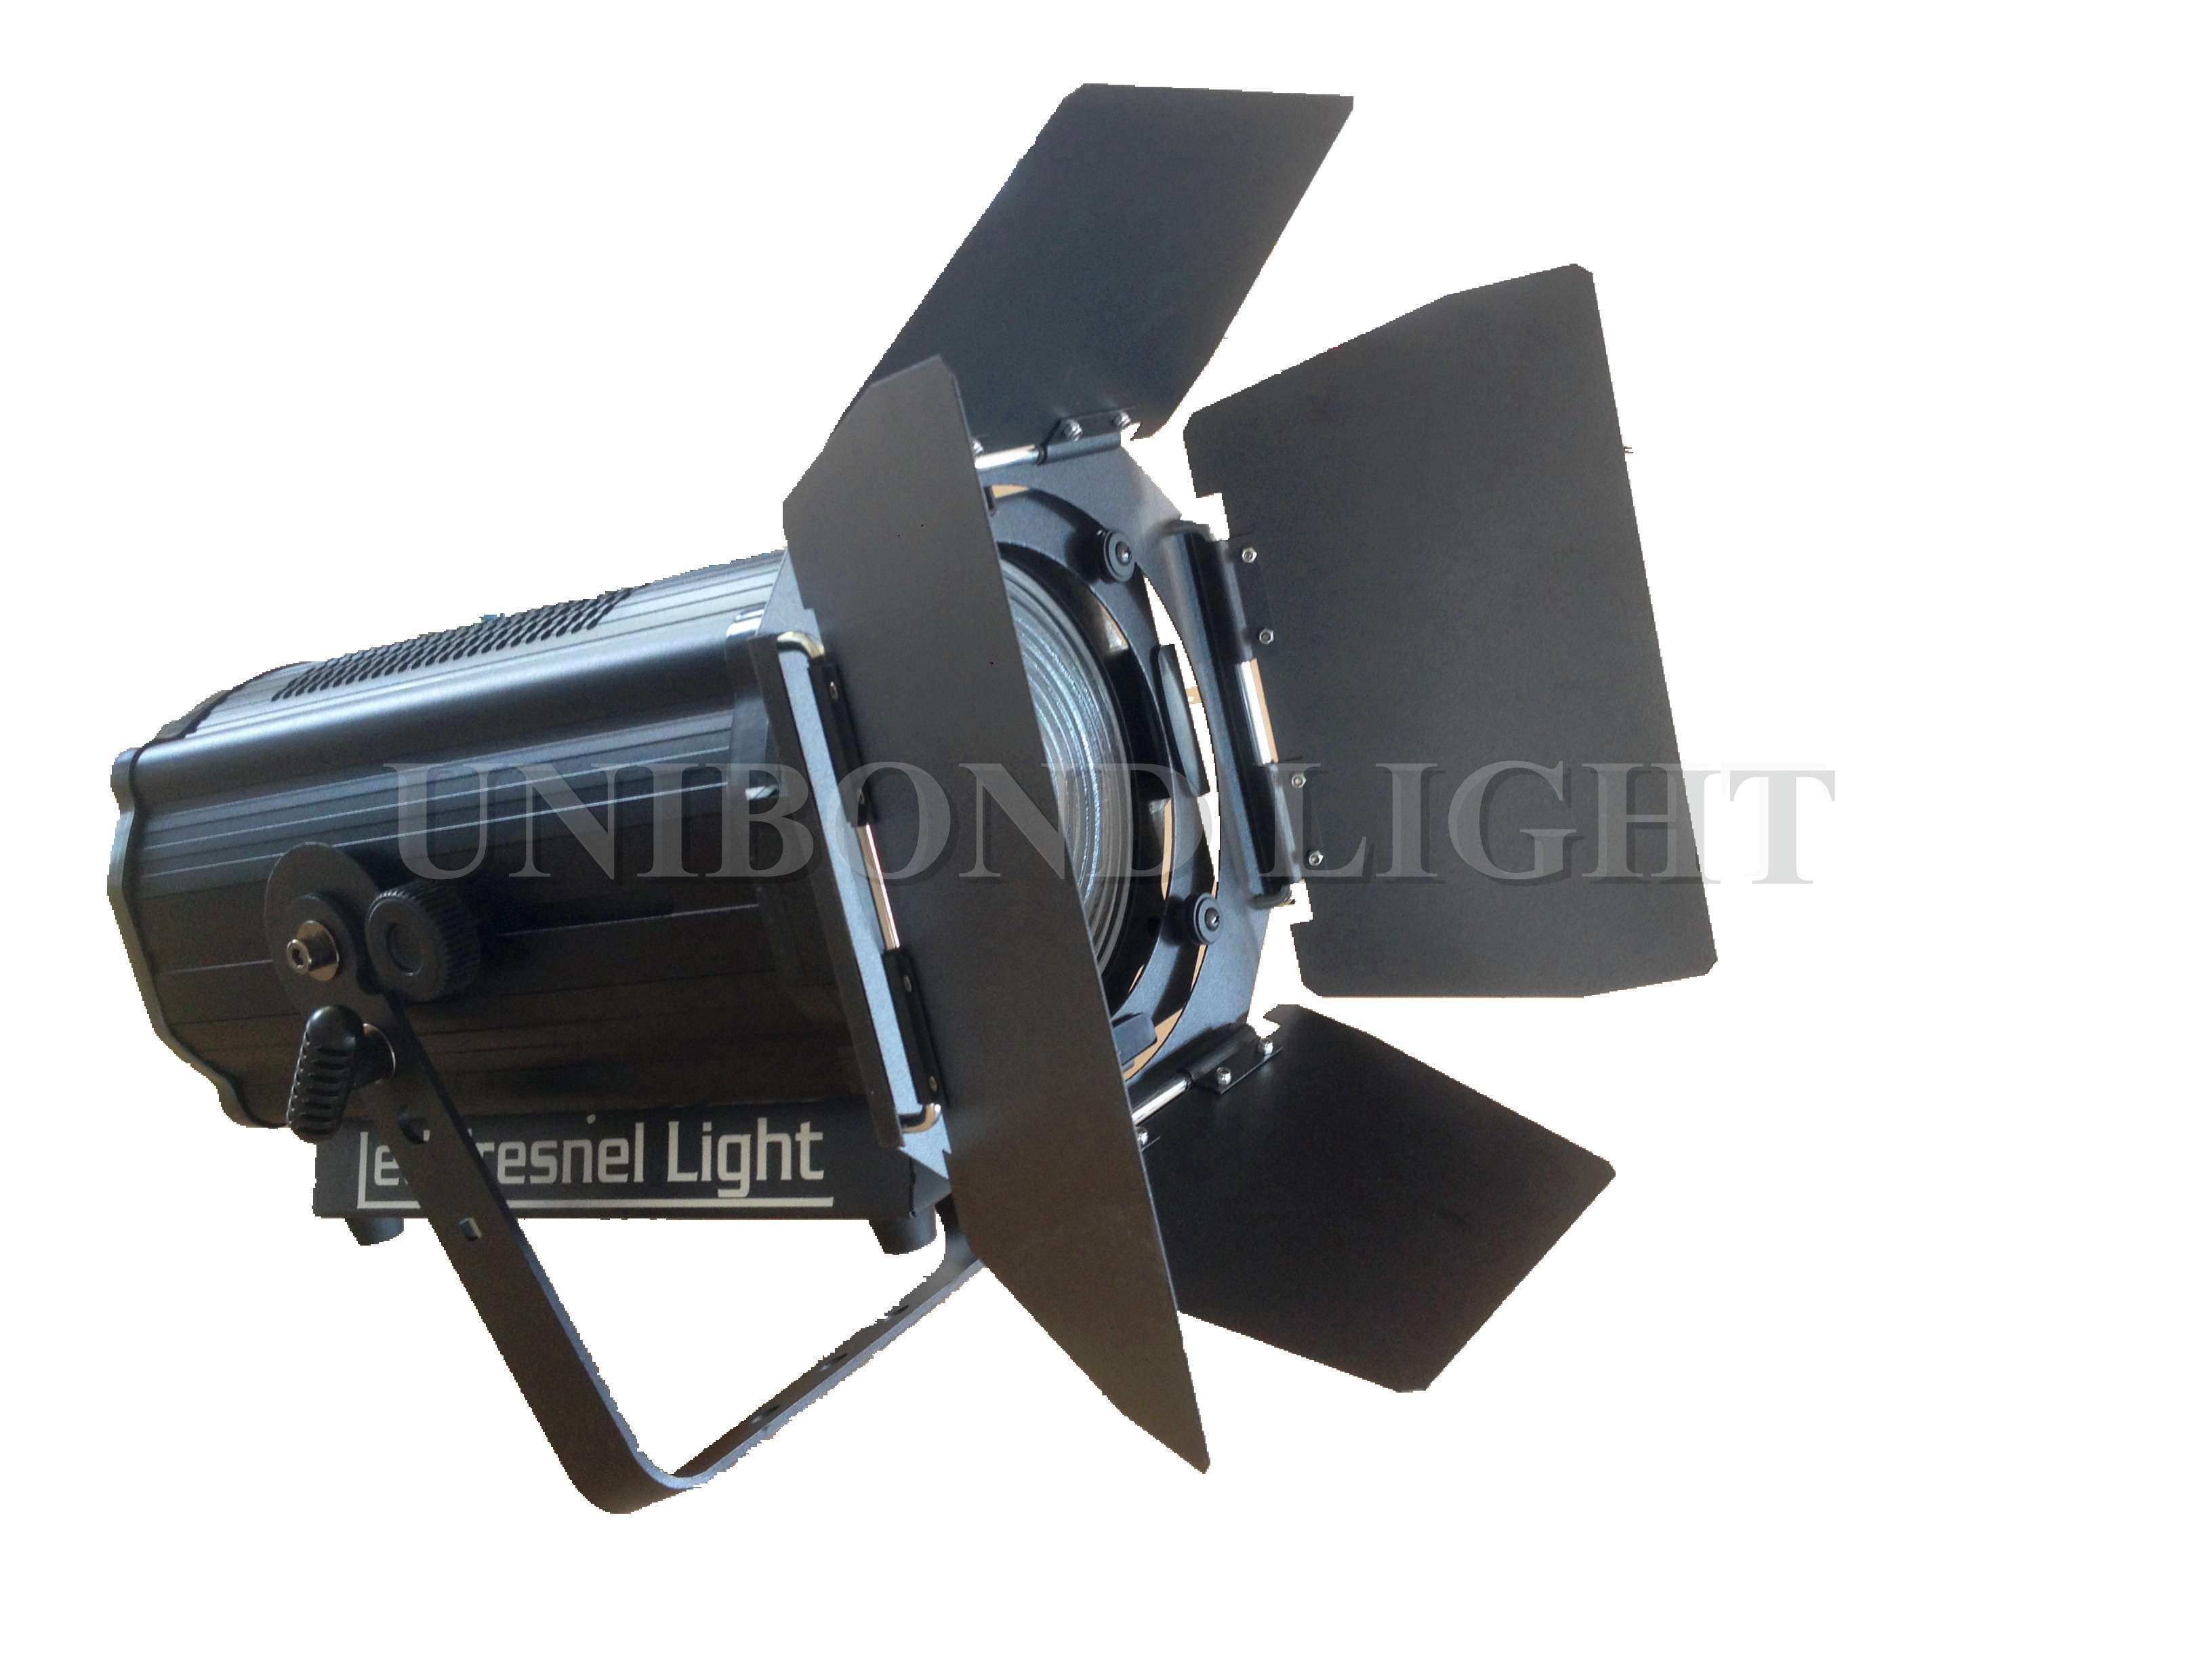 200W LED Profile Spot Light for Car Exhibition/Stage